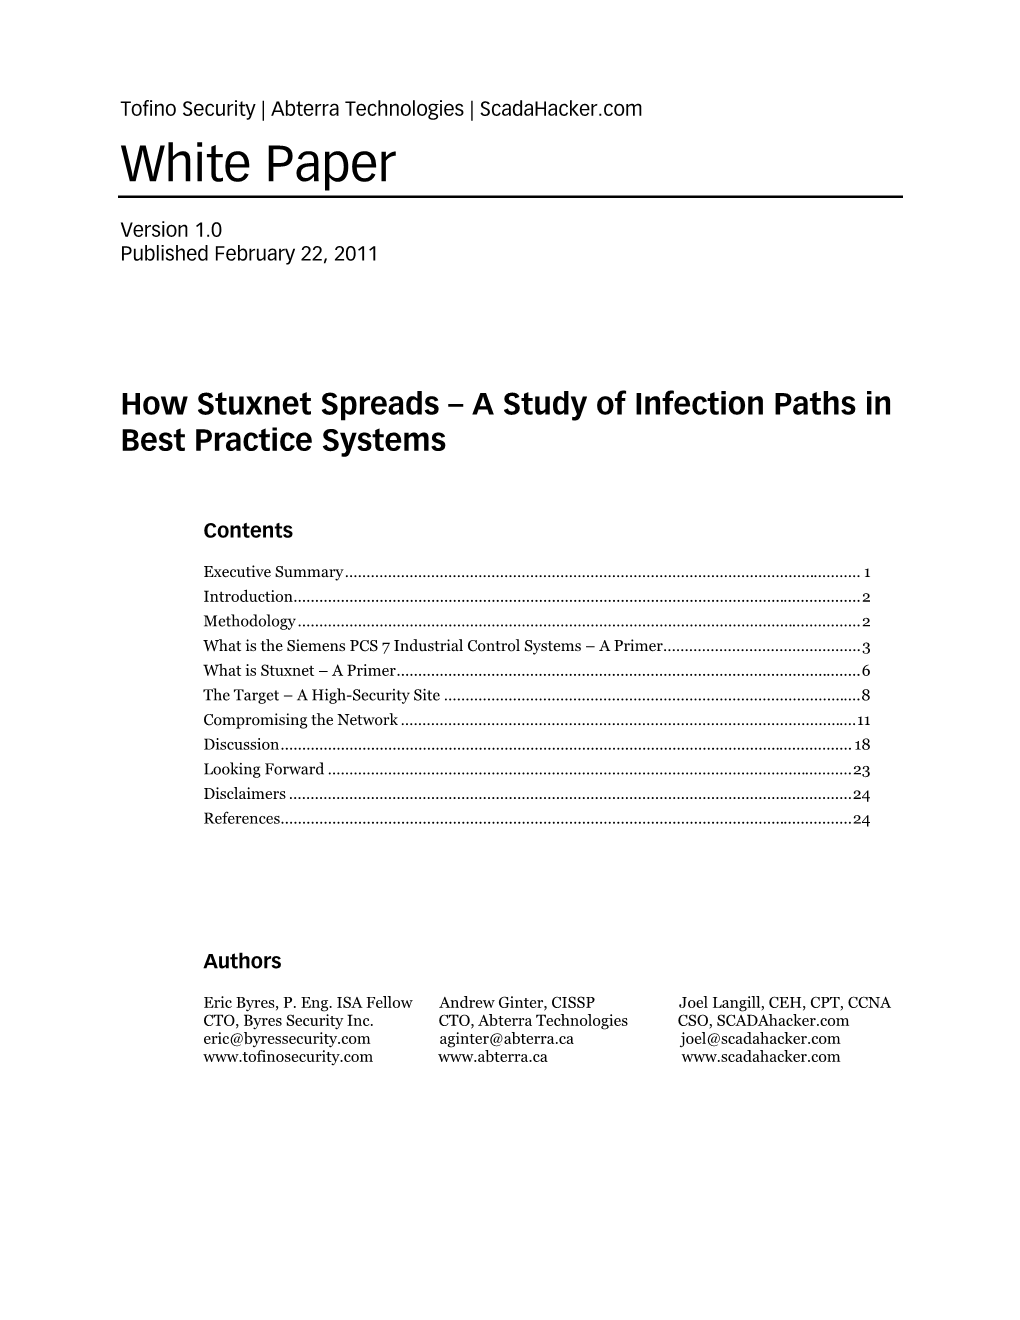 How Stuxnet Spreads – a Study of Infection Paths in Best Practice Systems